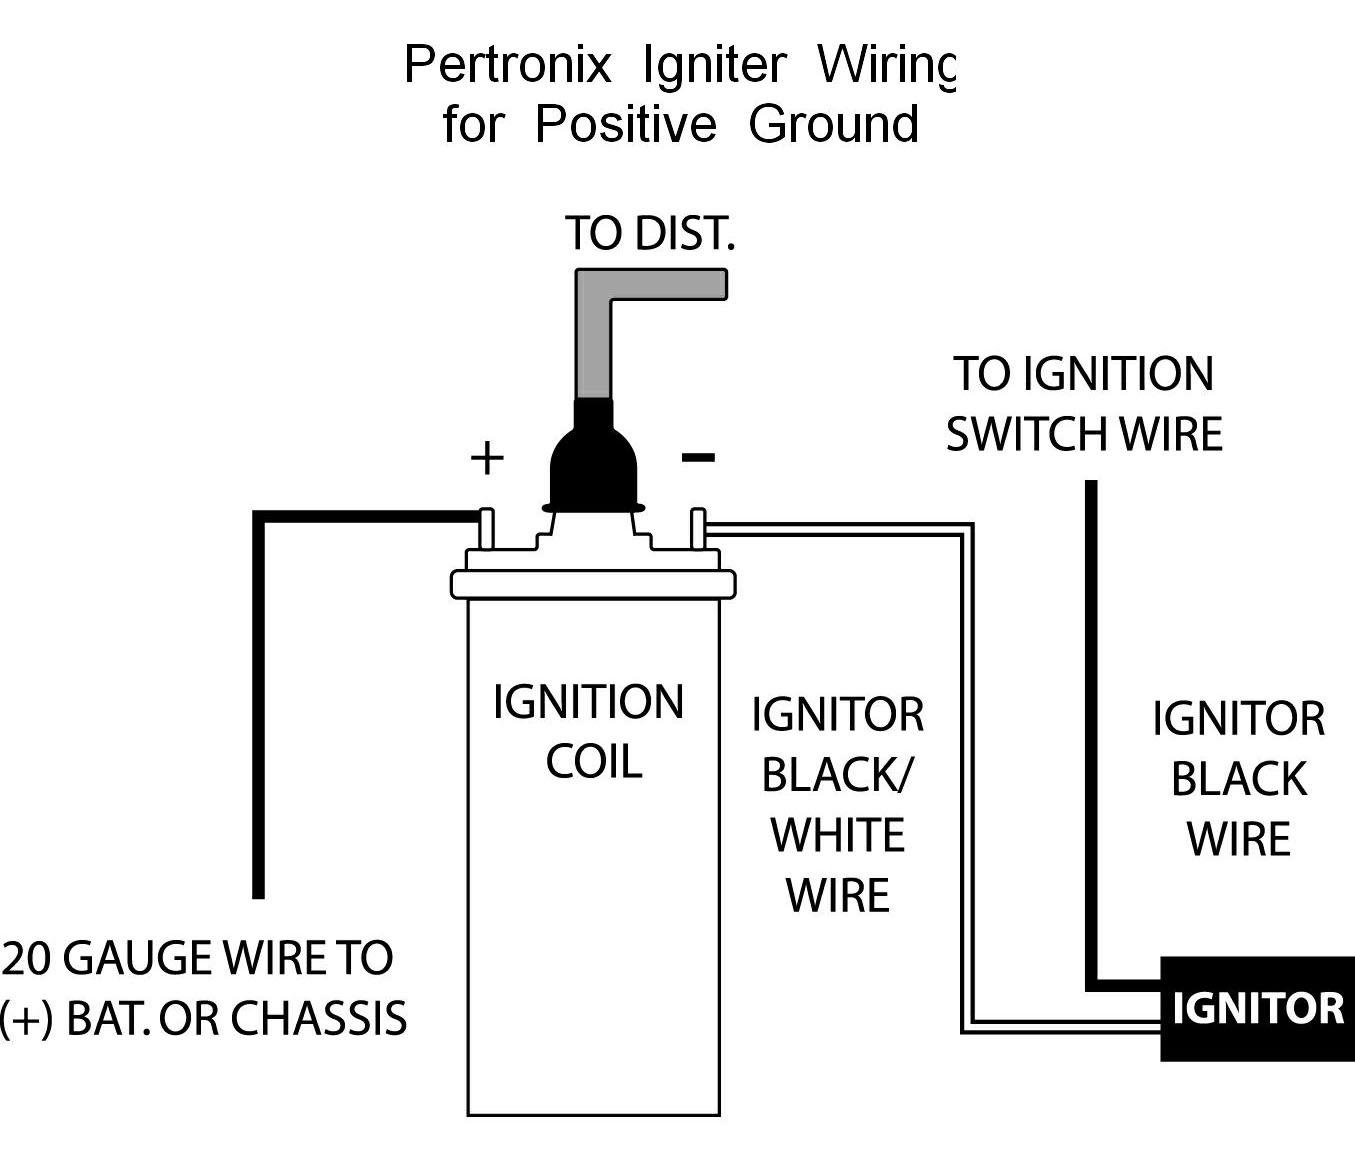 Ignition Coil Wiring Diagram : Ford Ignition Coil Wiring Diagram